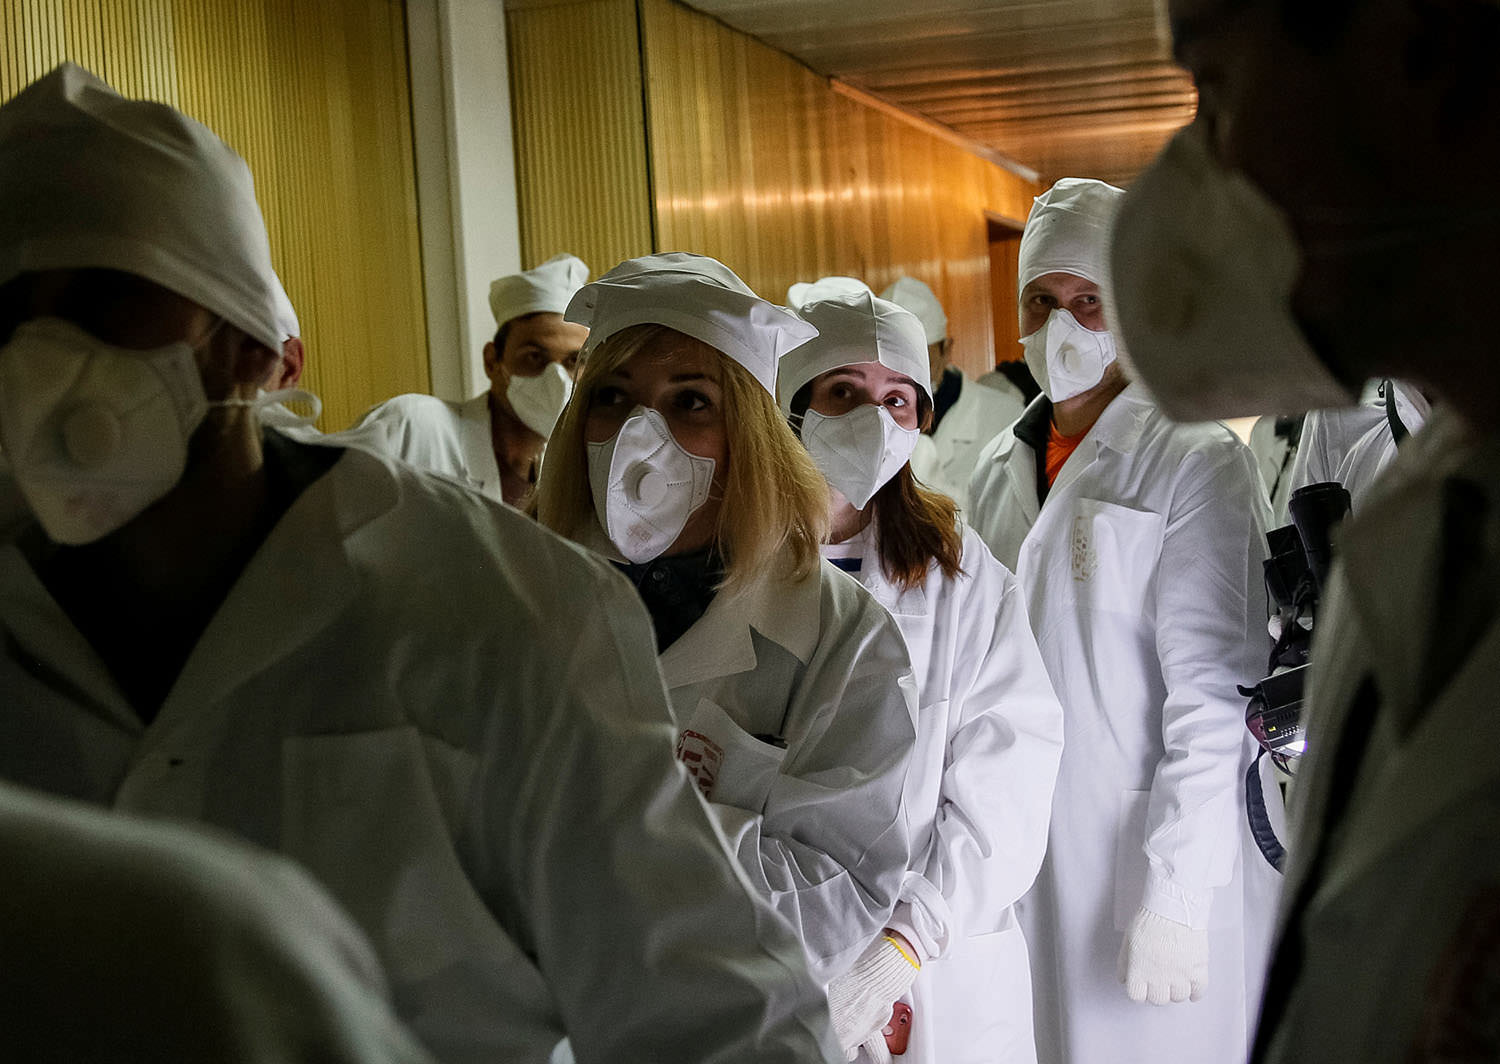 32 years after chernobyl disaster doctors in the hallway of the third reactor